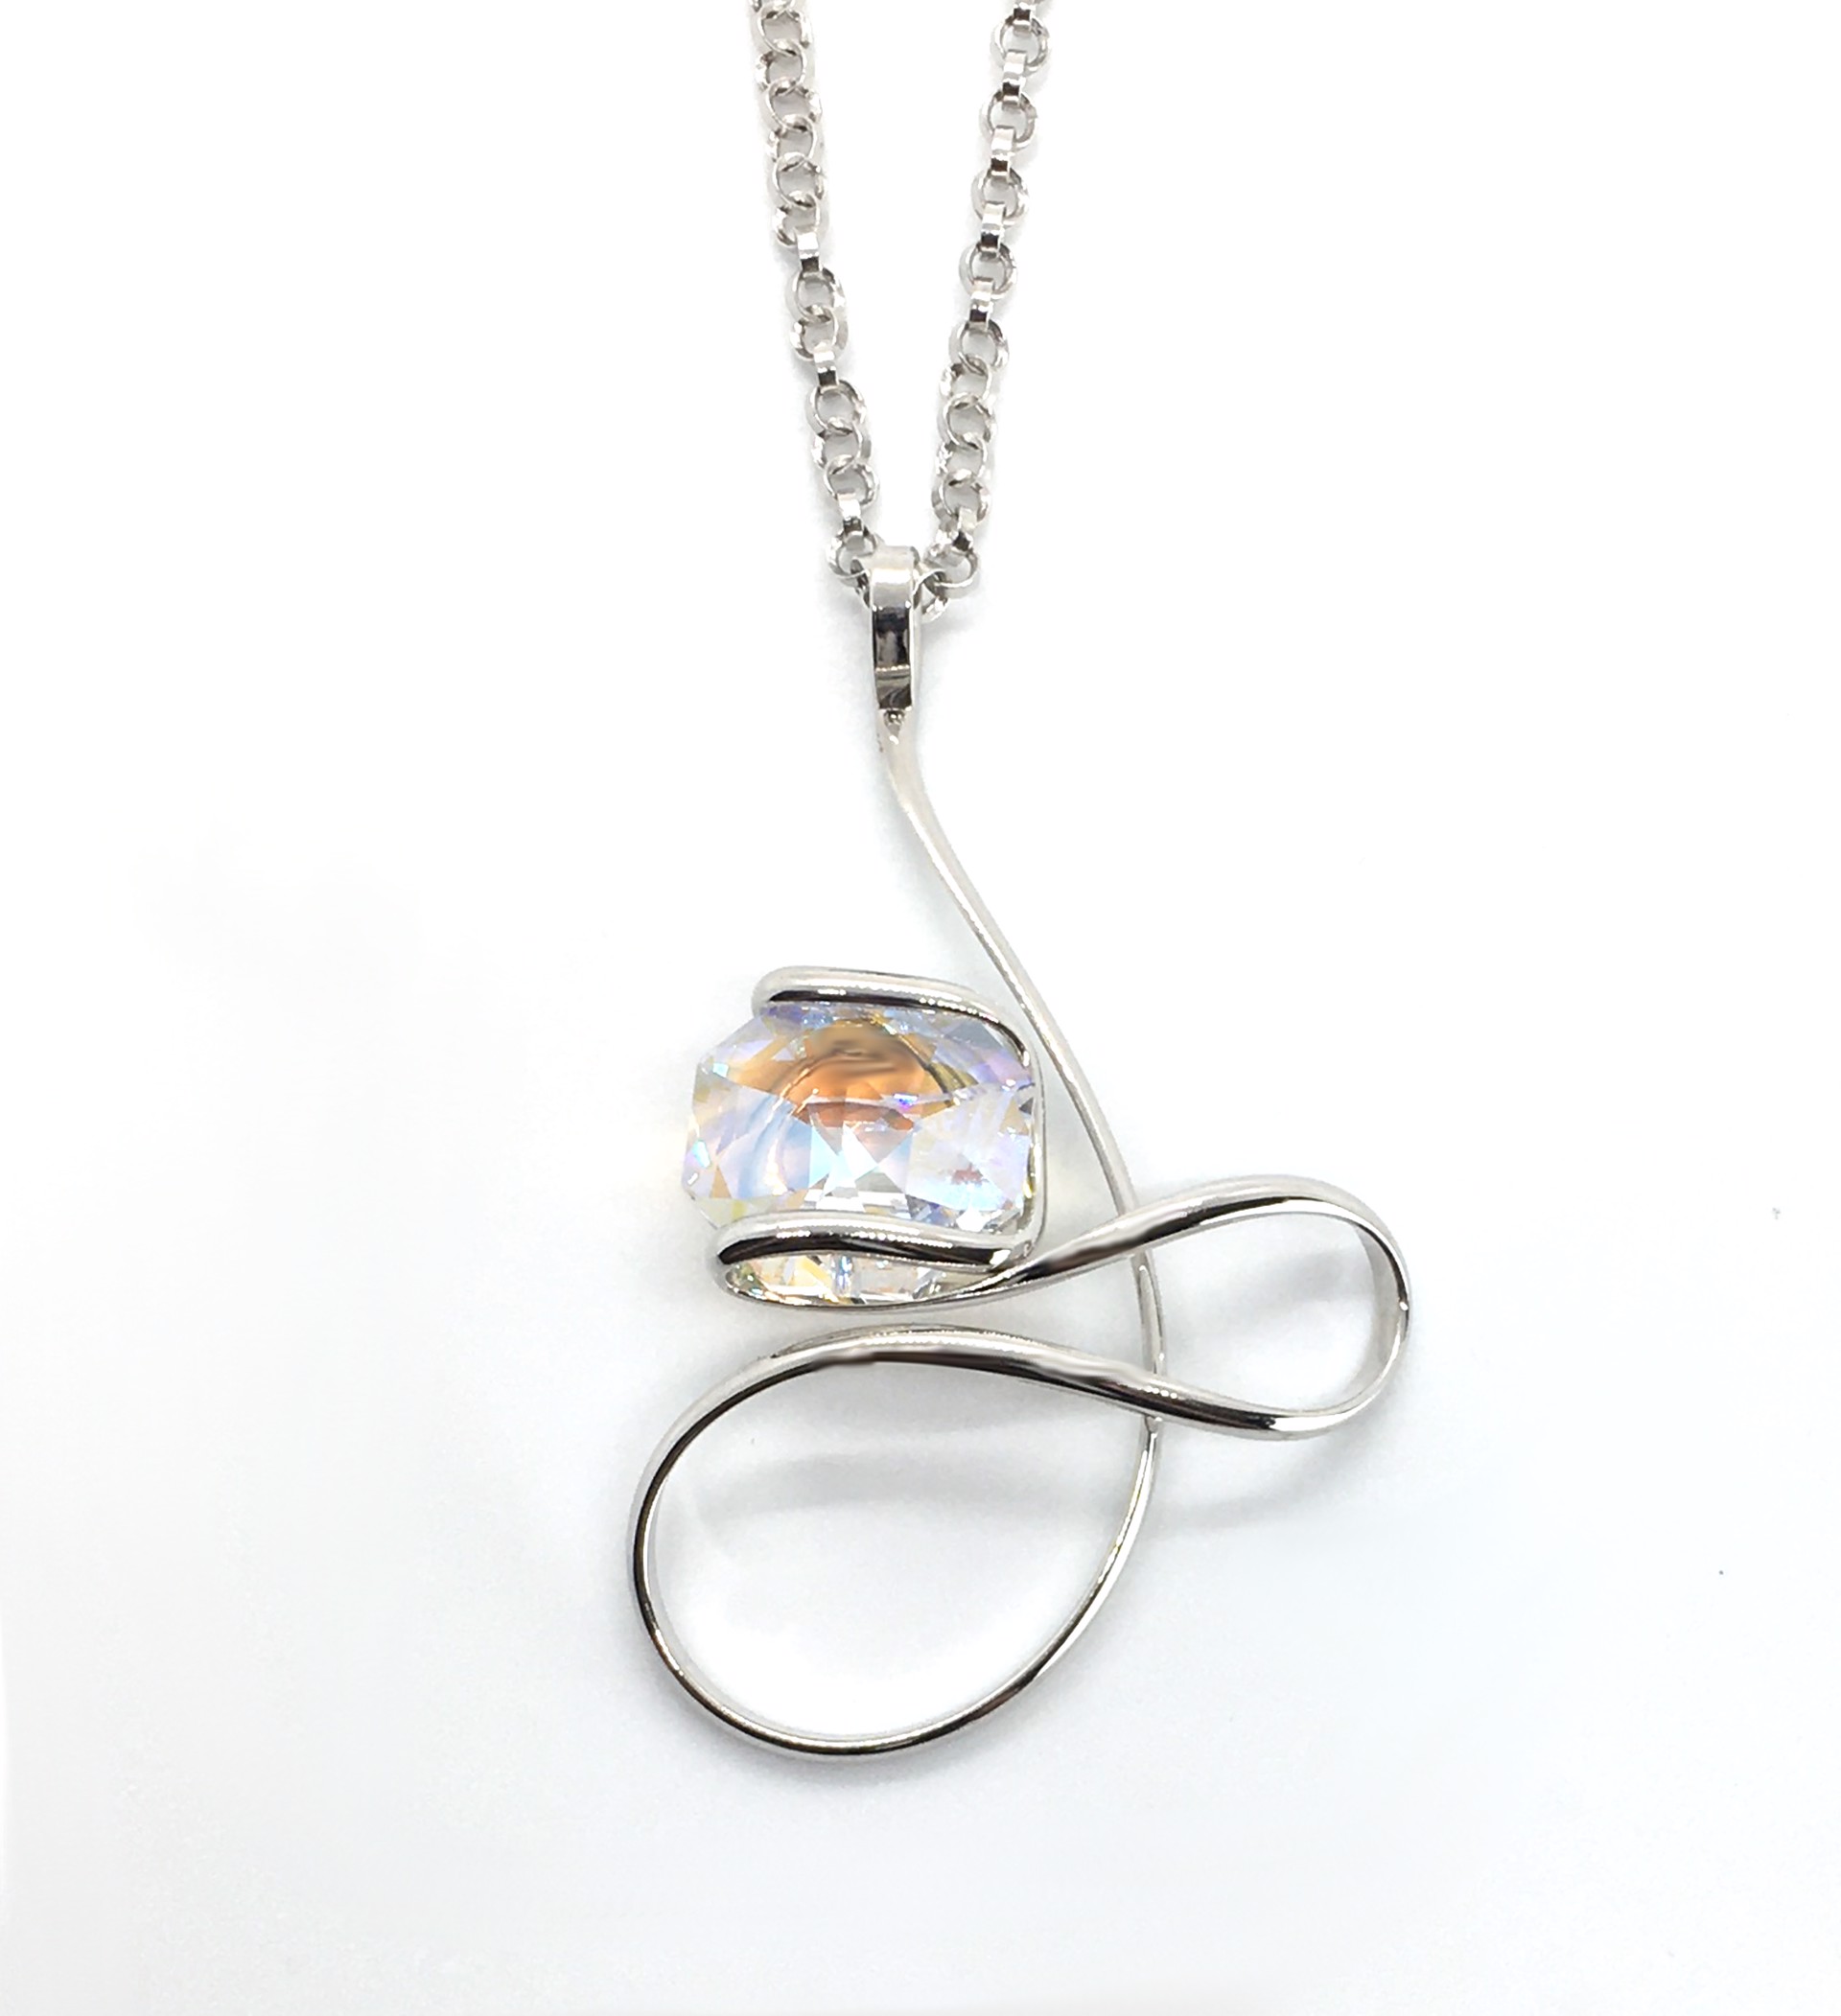 Pendant ~  Clear Austrian Swarovski Crystal, Mixed Metals Triple Coated with Rhodium ~ Handmade Setting ~ Chain Available Separately by Monique Touber